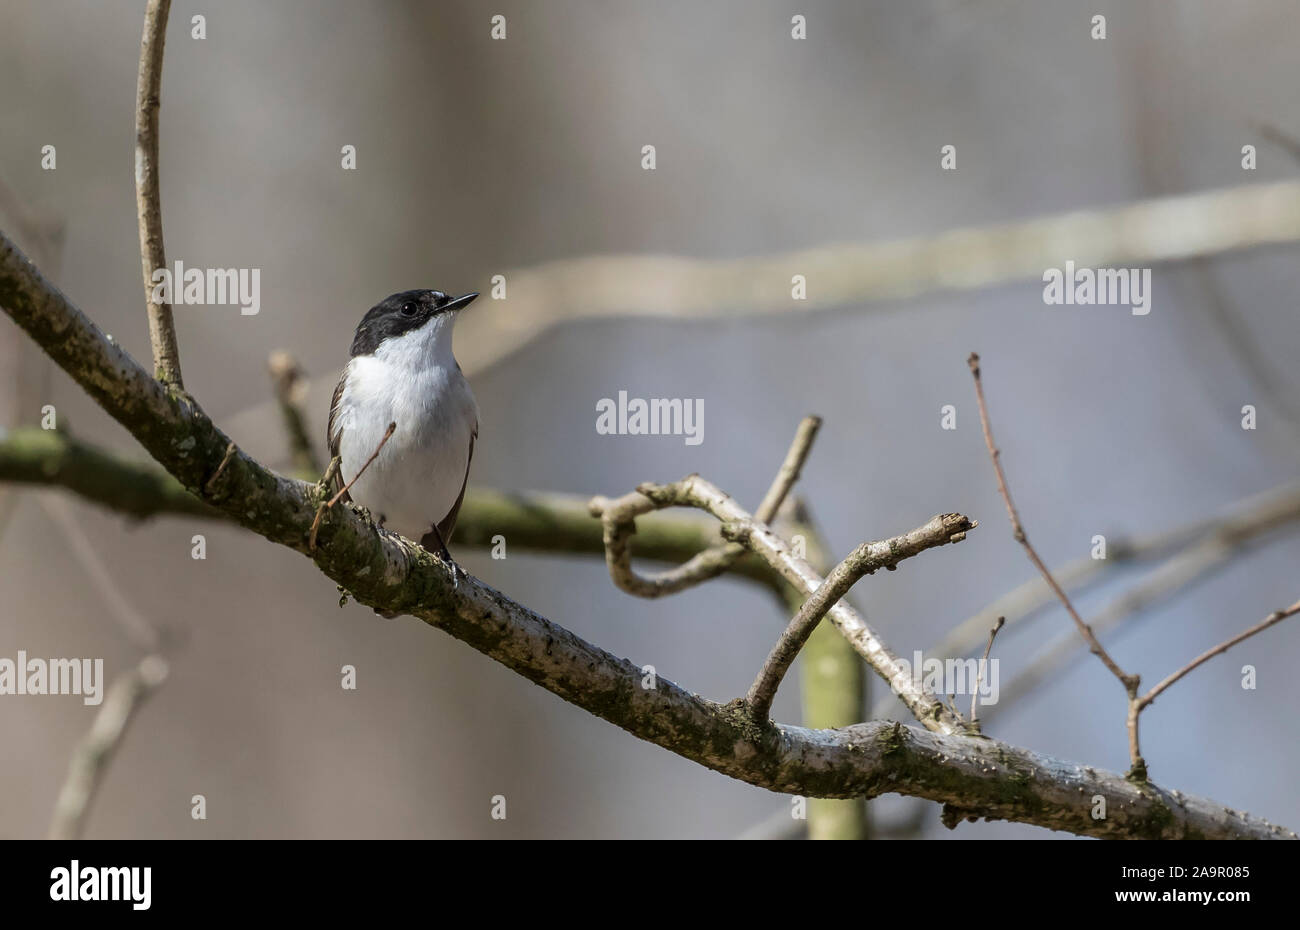 Detailed, front view close up of a wild, male pied flycatcher (Ficedula hypoleuca) isolated outdoors, perched on a branch, in UK woodland in spring. Stock Photo